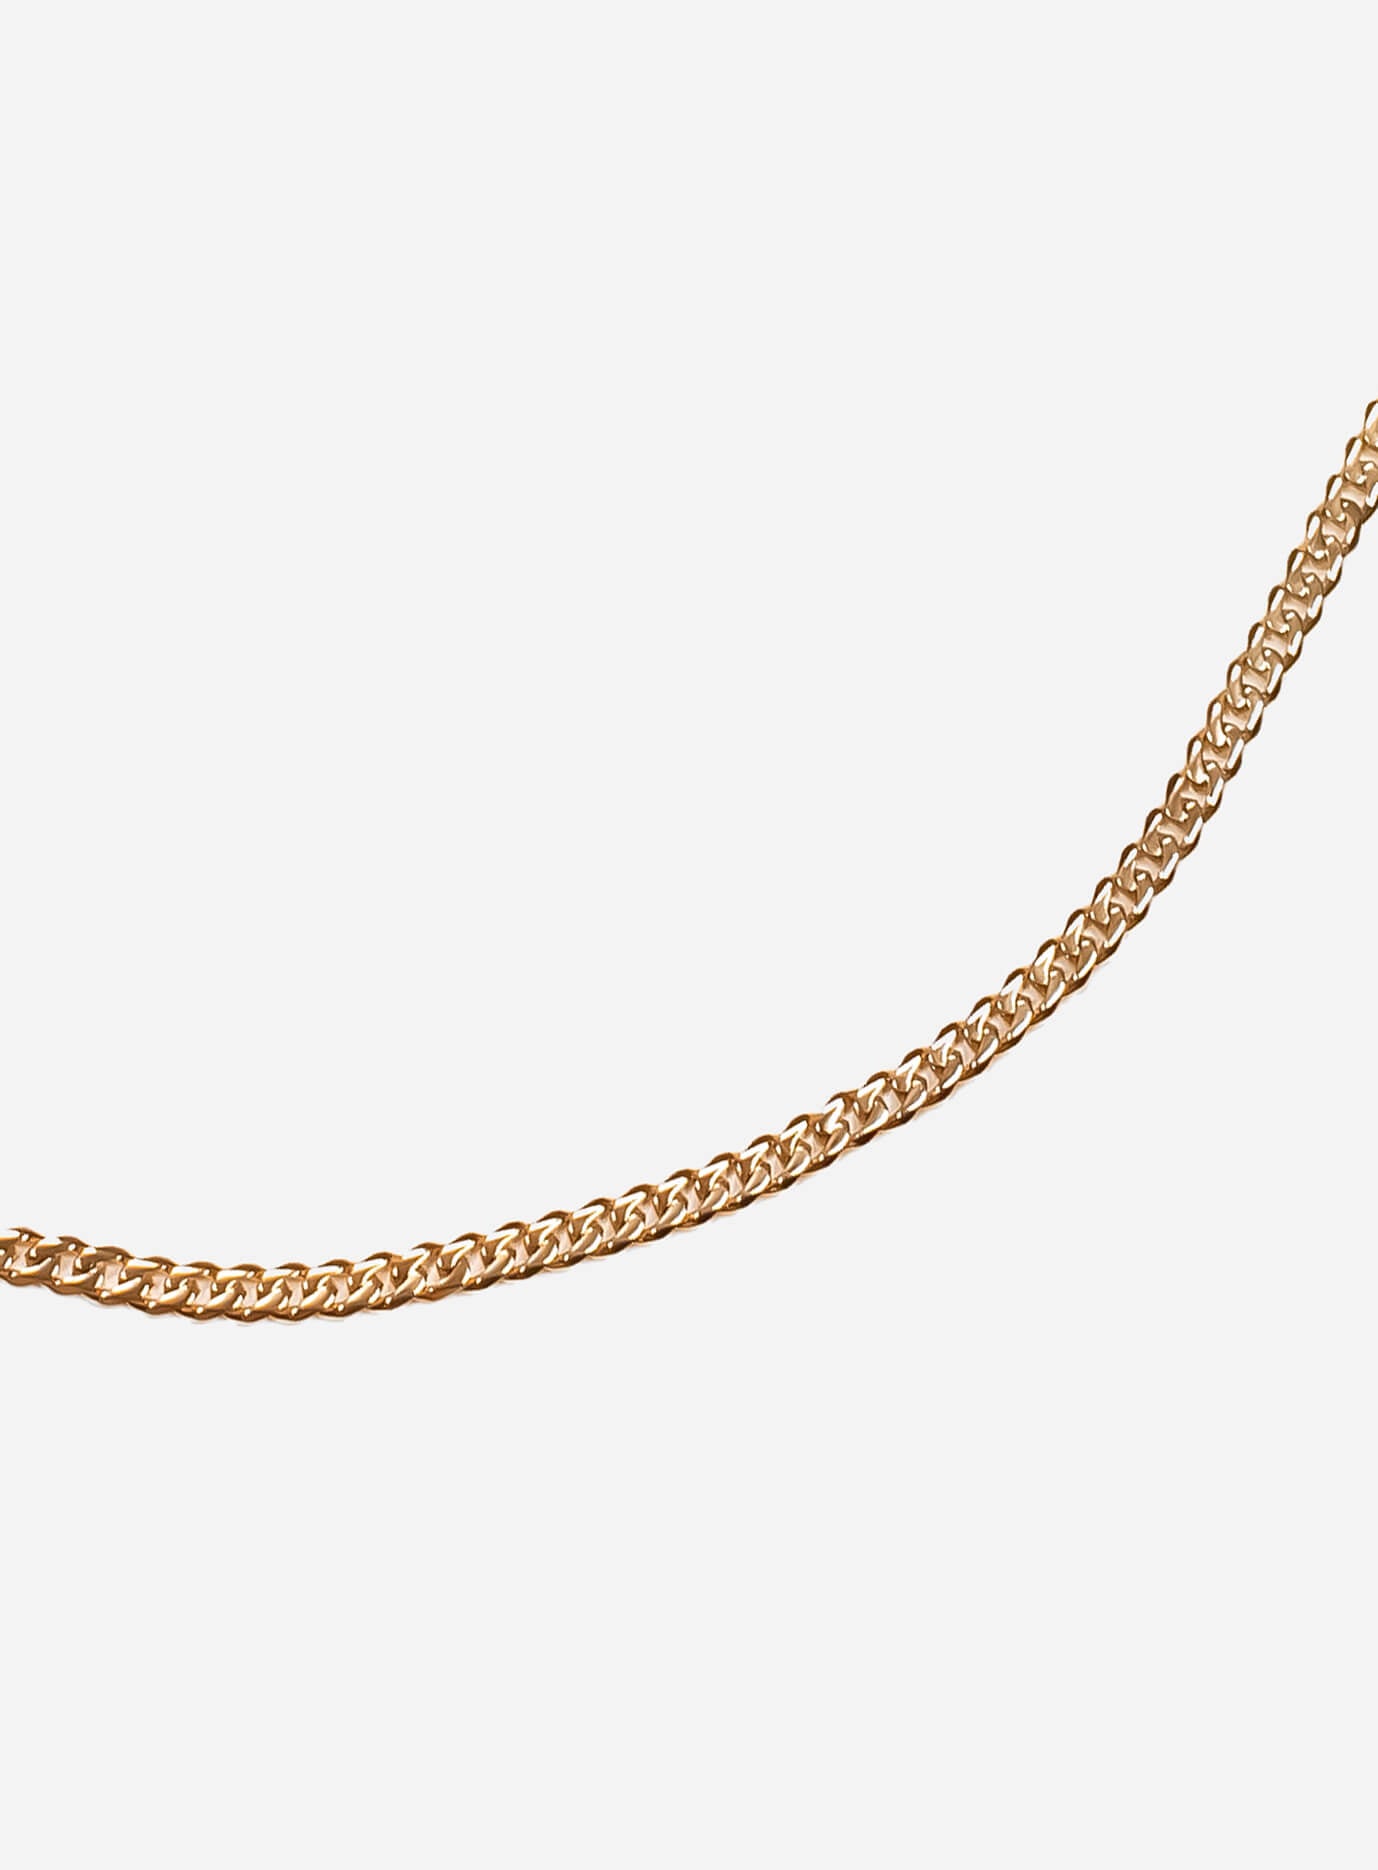 GD Stainless Steel Gold Chain 3.5mm x 51cm